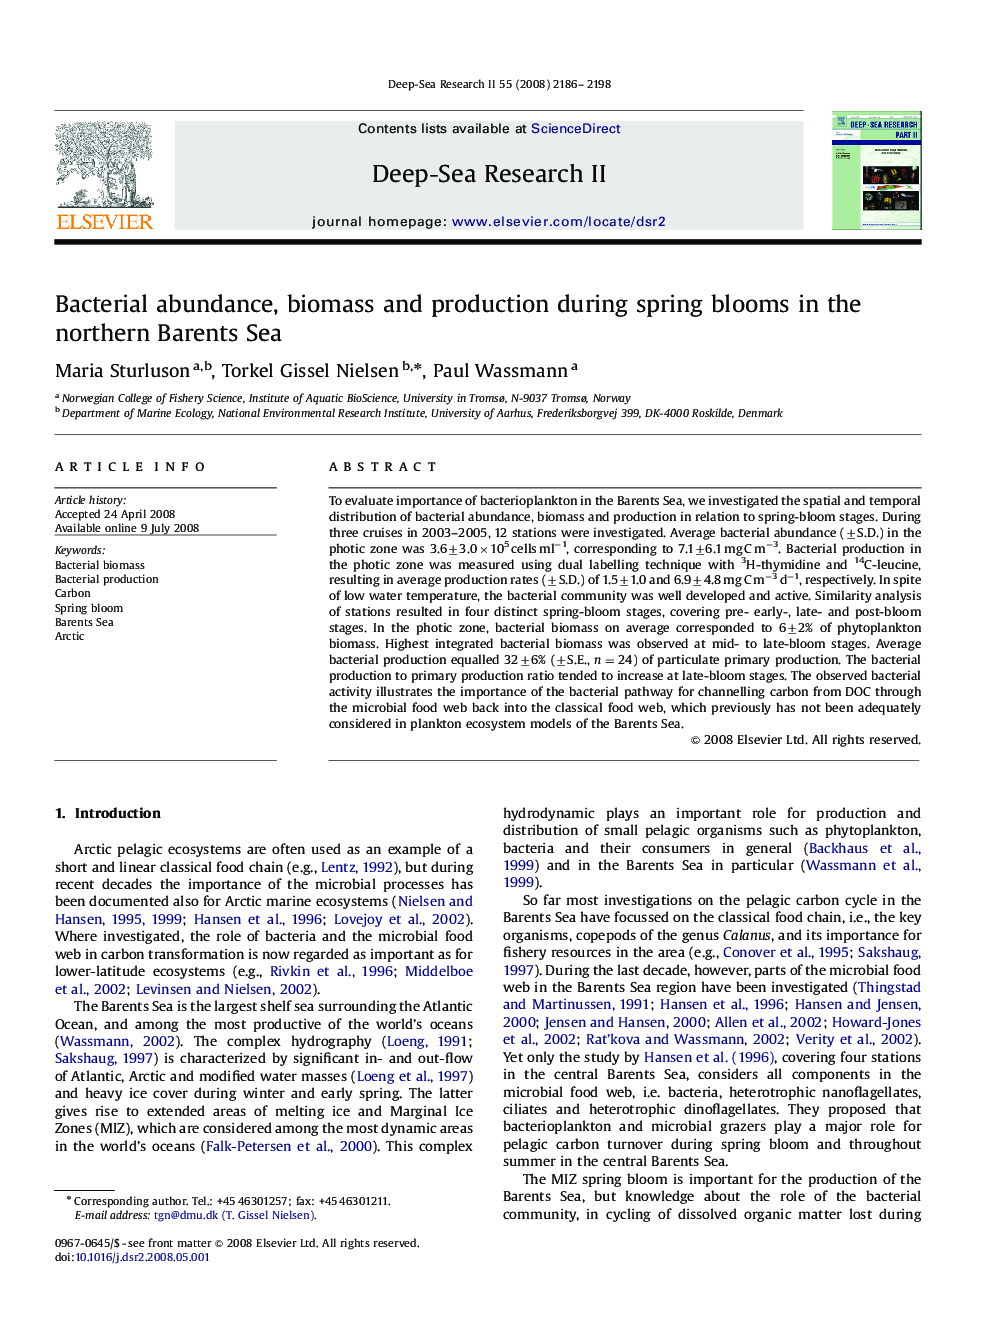 Bacterial abundance, biomass and production during spring blooms in the northern Barents Sea